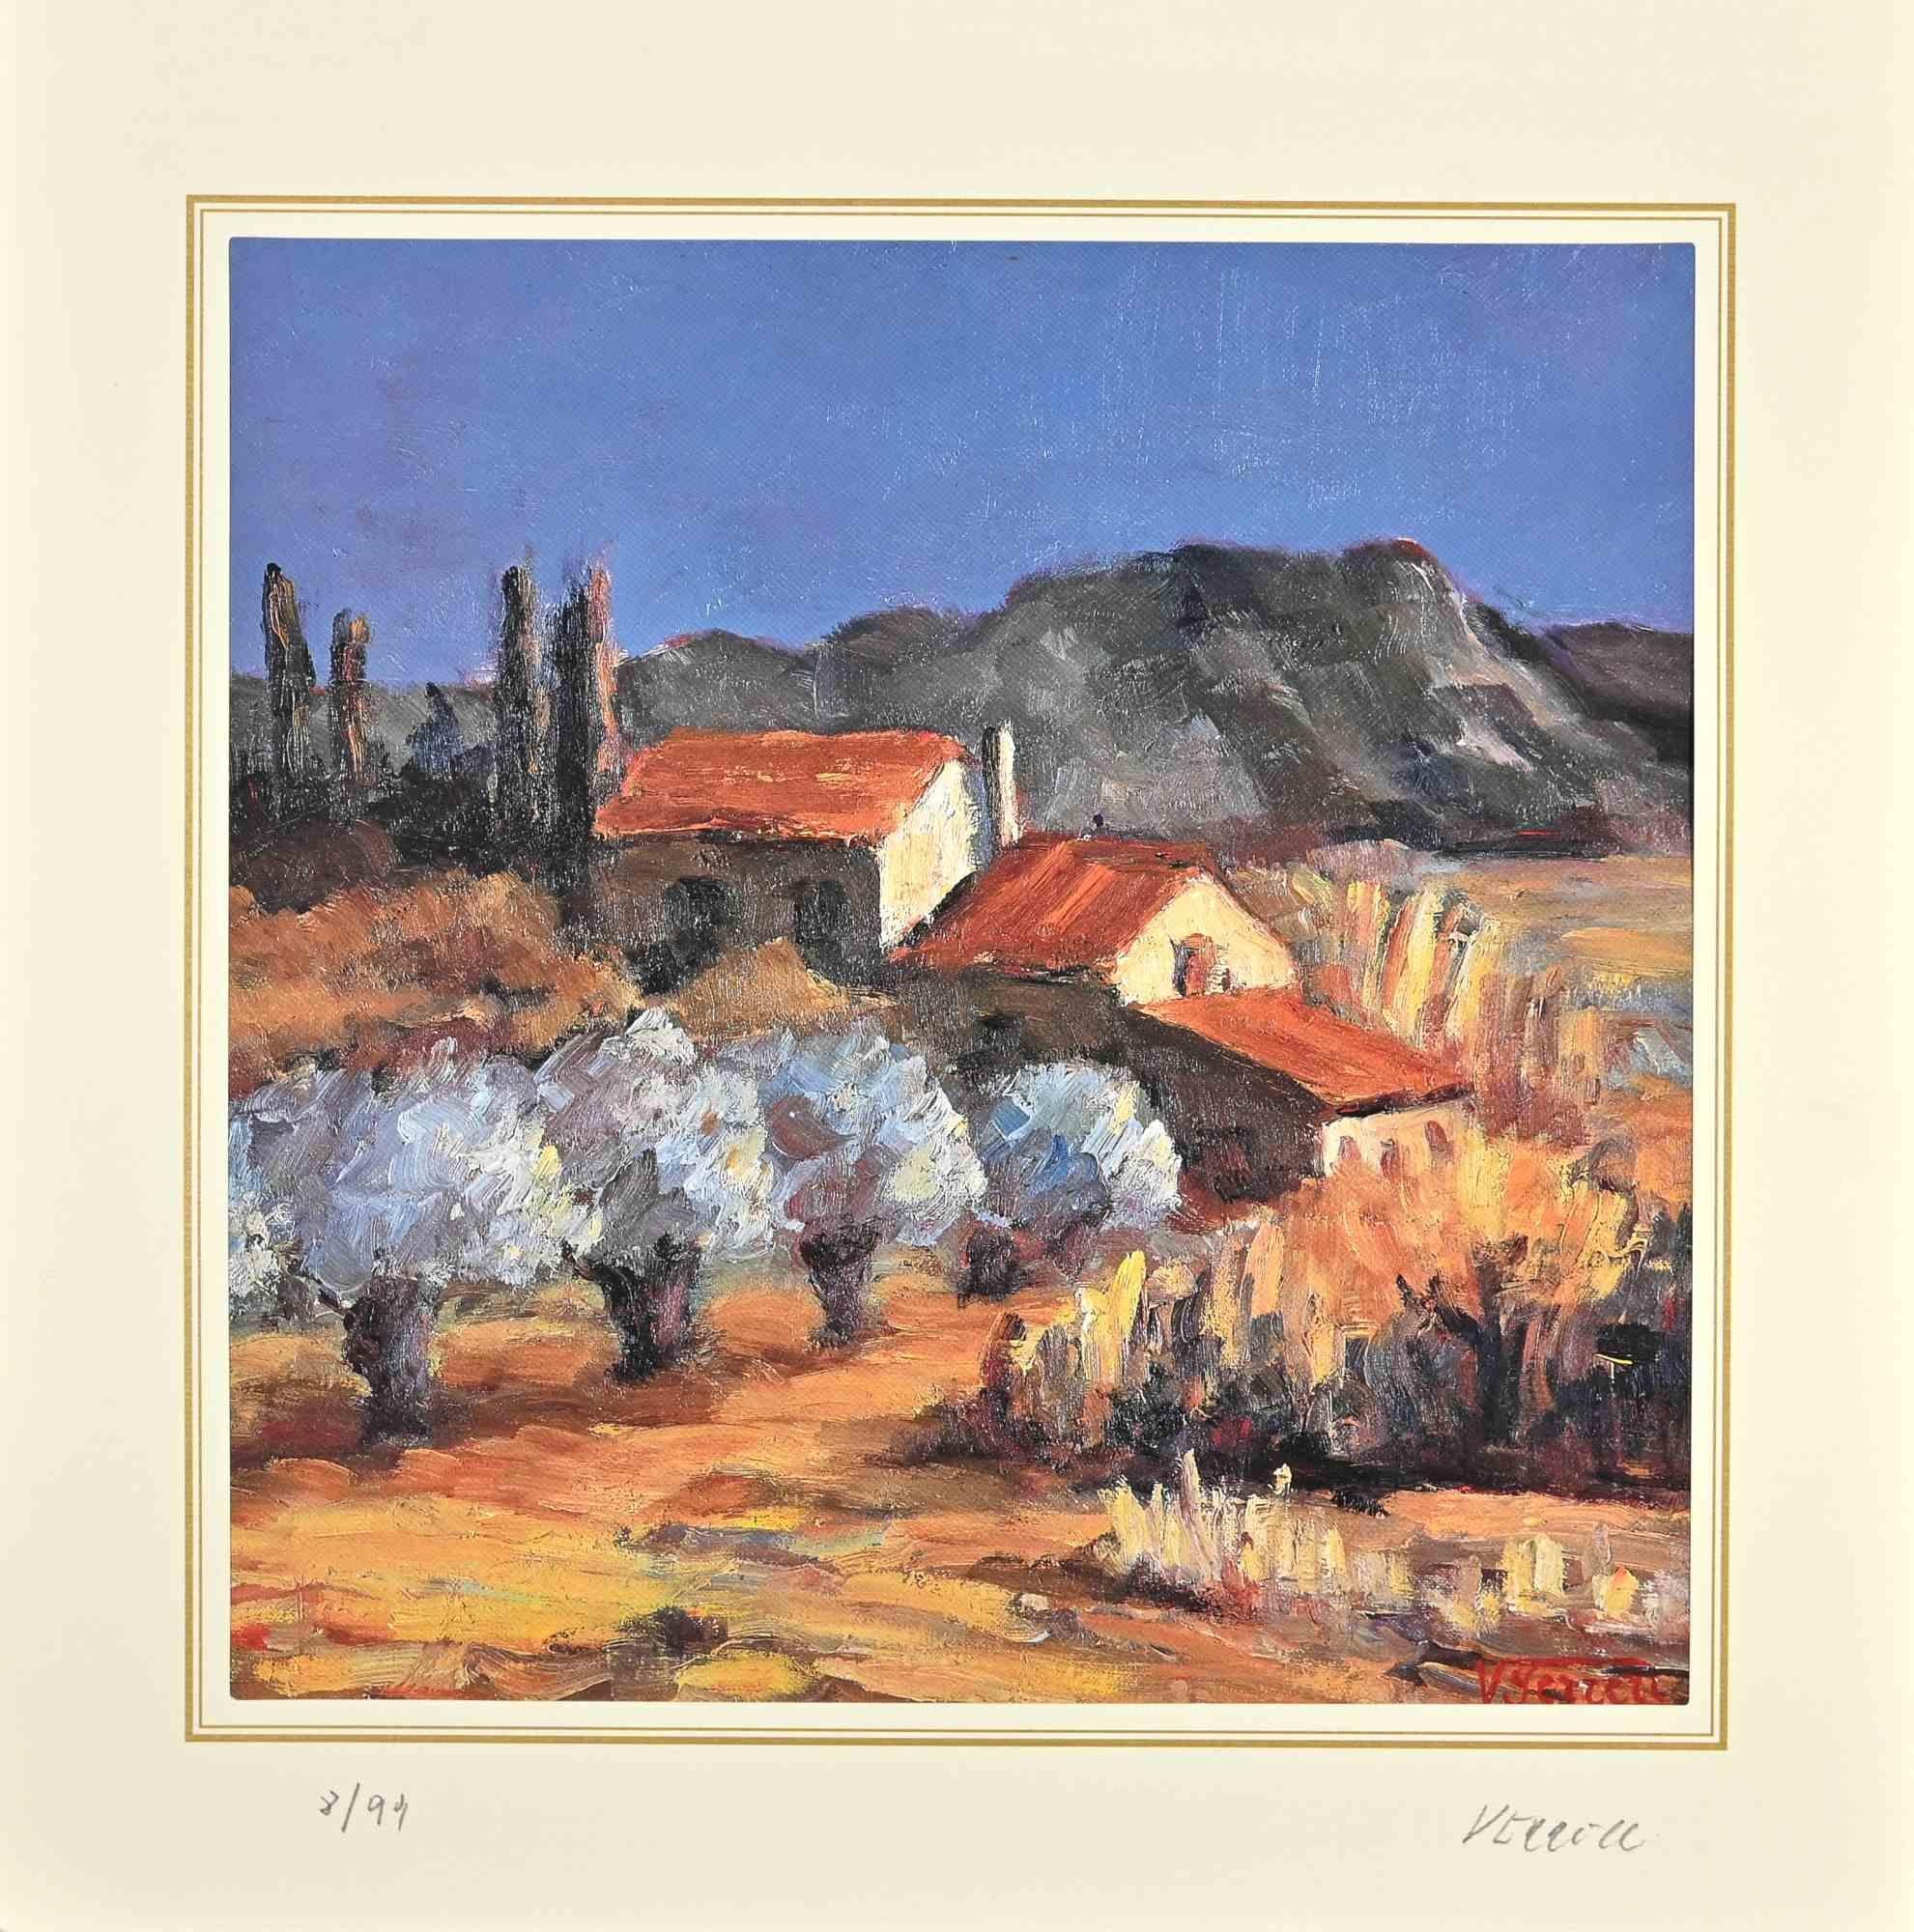 Landscape is a lithograph attributed to Nicholas Verrall (1945)  in the Late 20th Century.

Hand-signed on the right corner. Numbered, Edition, 8/99, on the left margin. On the back is the label of the certificate of  authenticity.

The artwork is